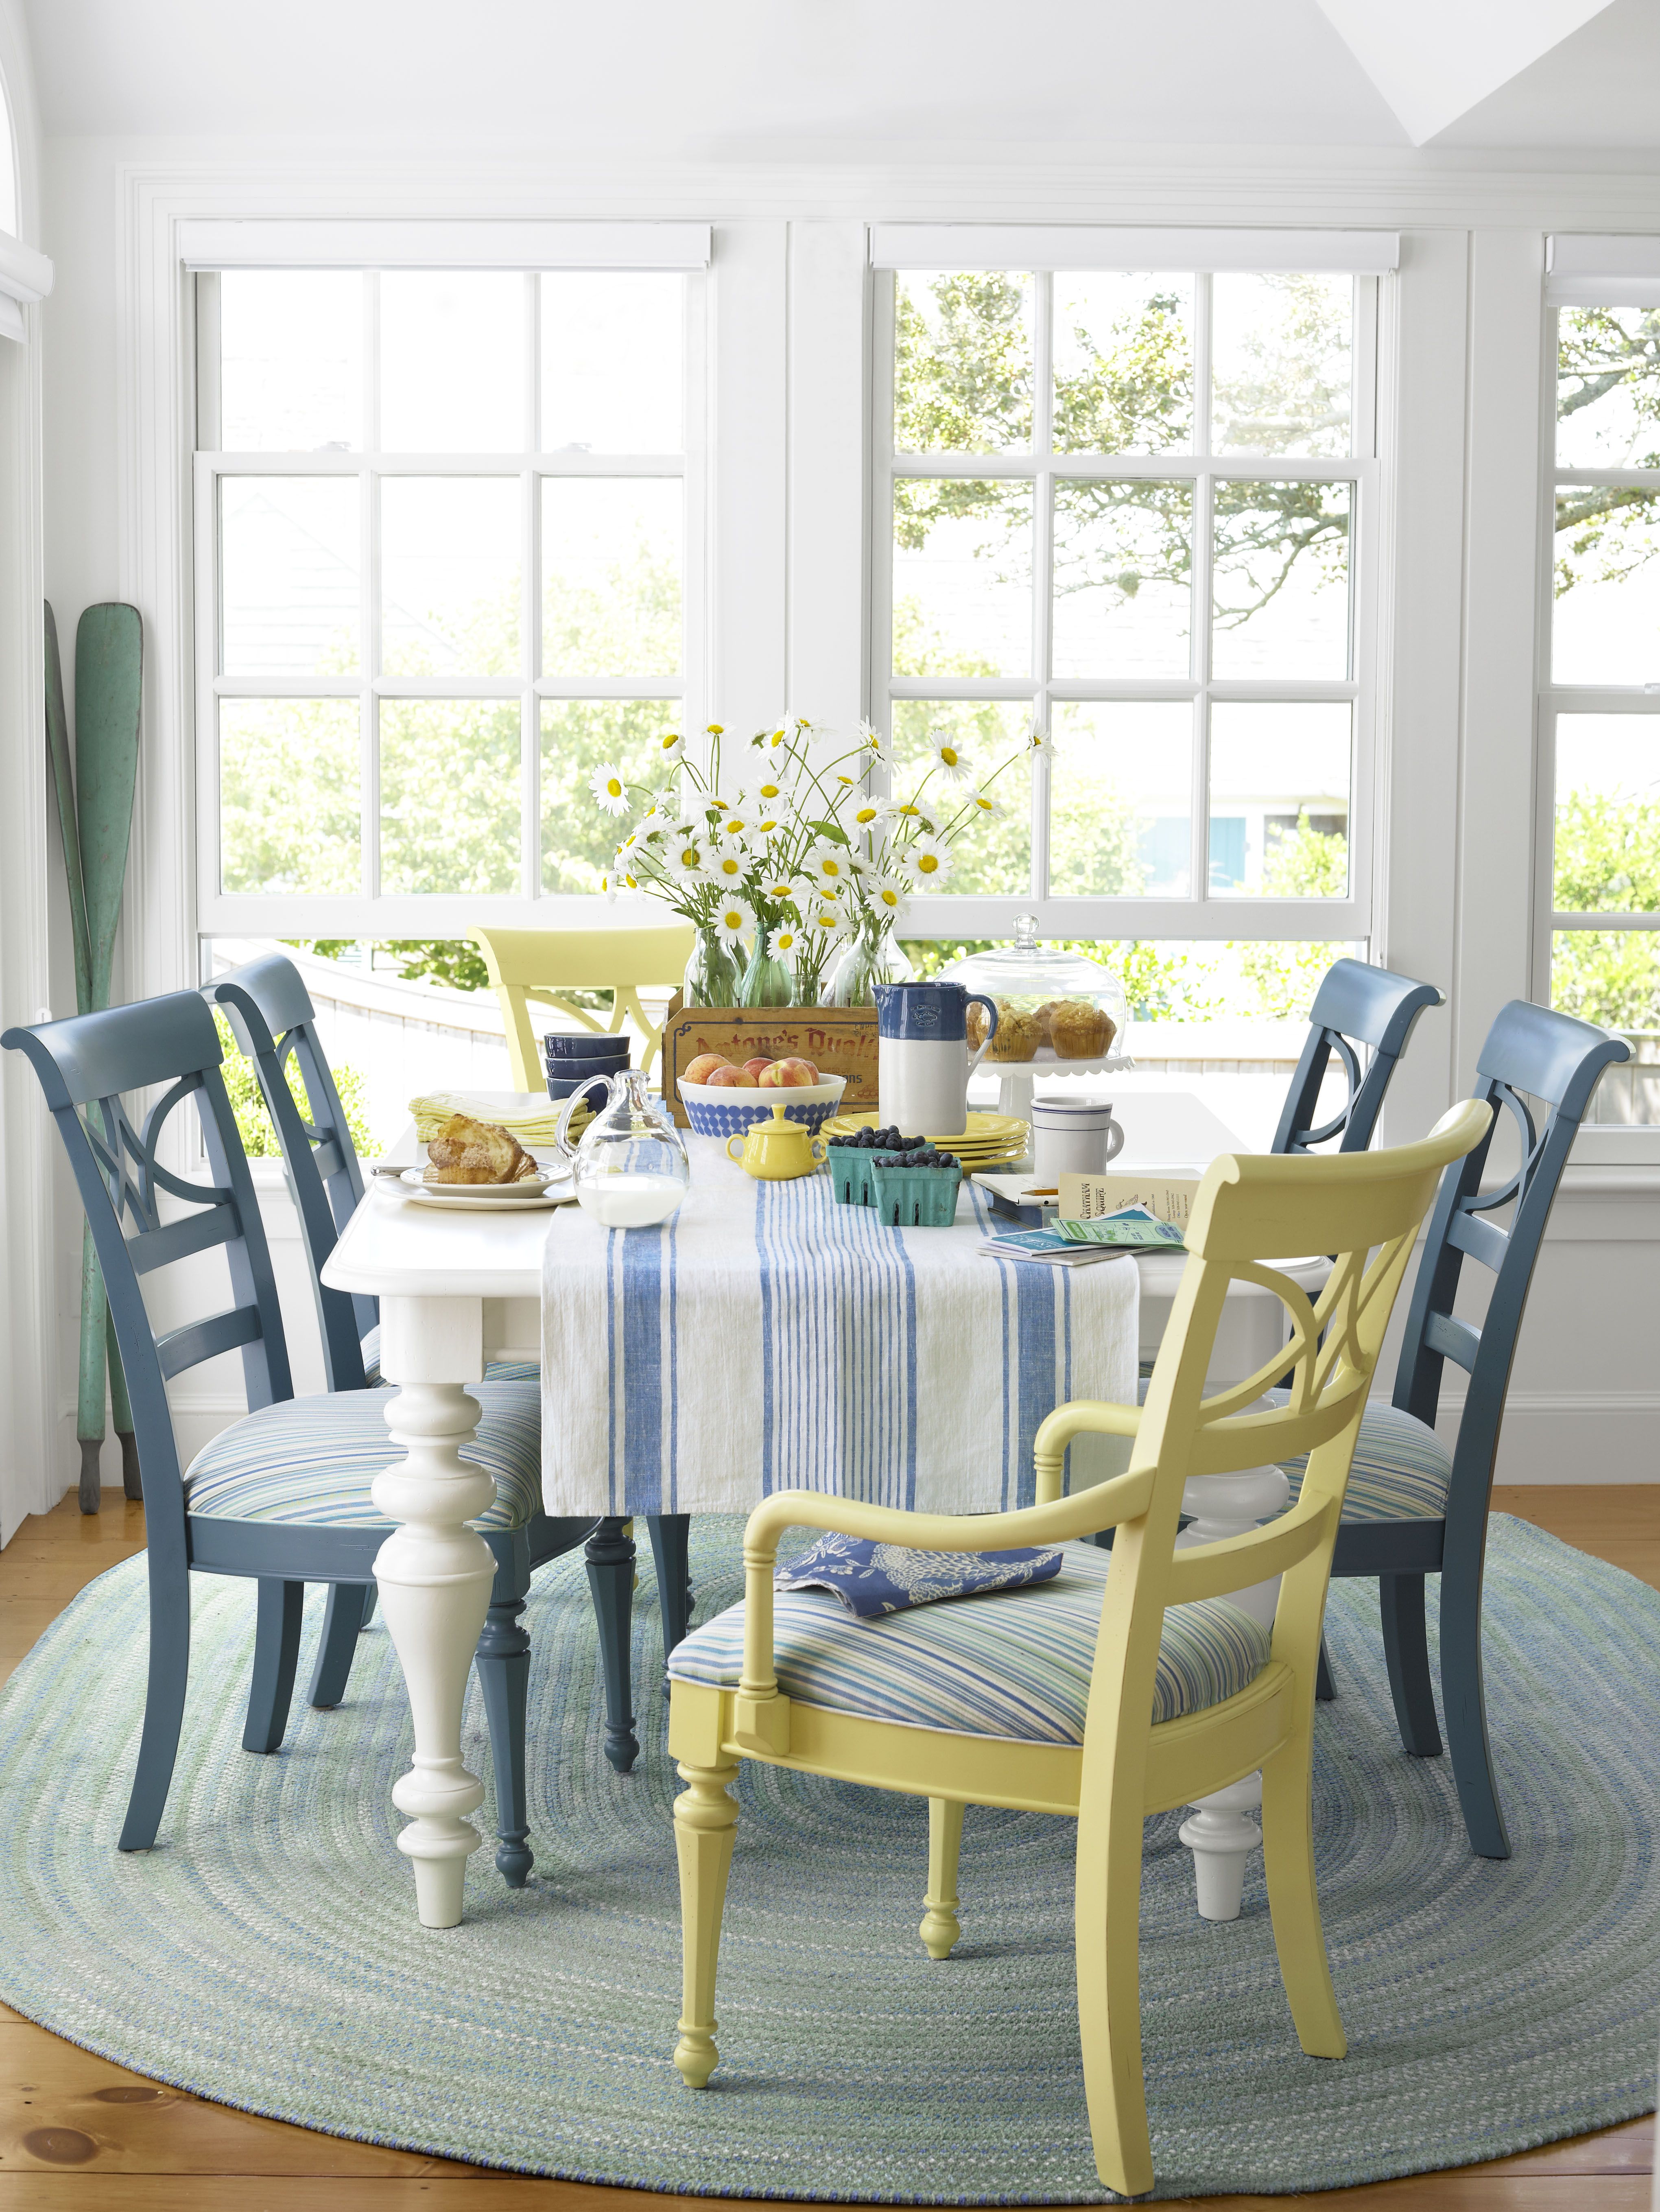 48 Beach House Decorating Ideas, Beach Style Dining Table And Chairs